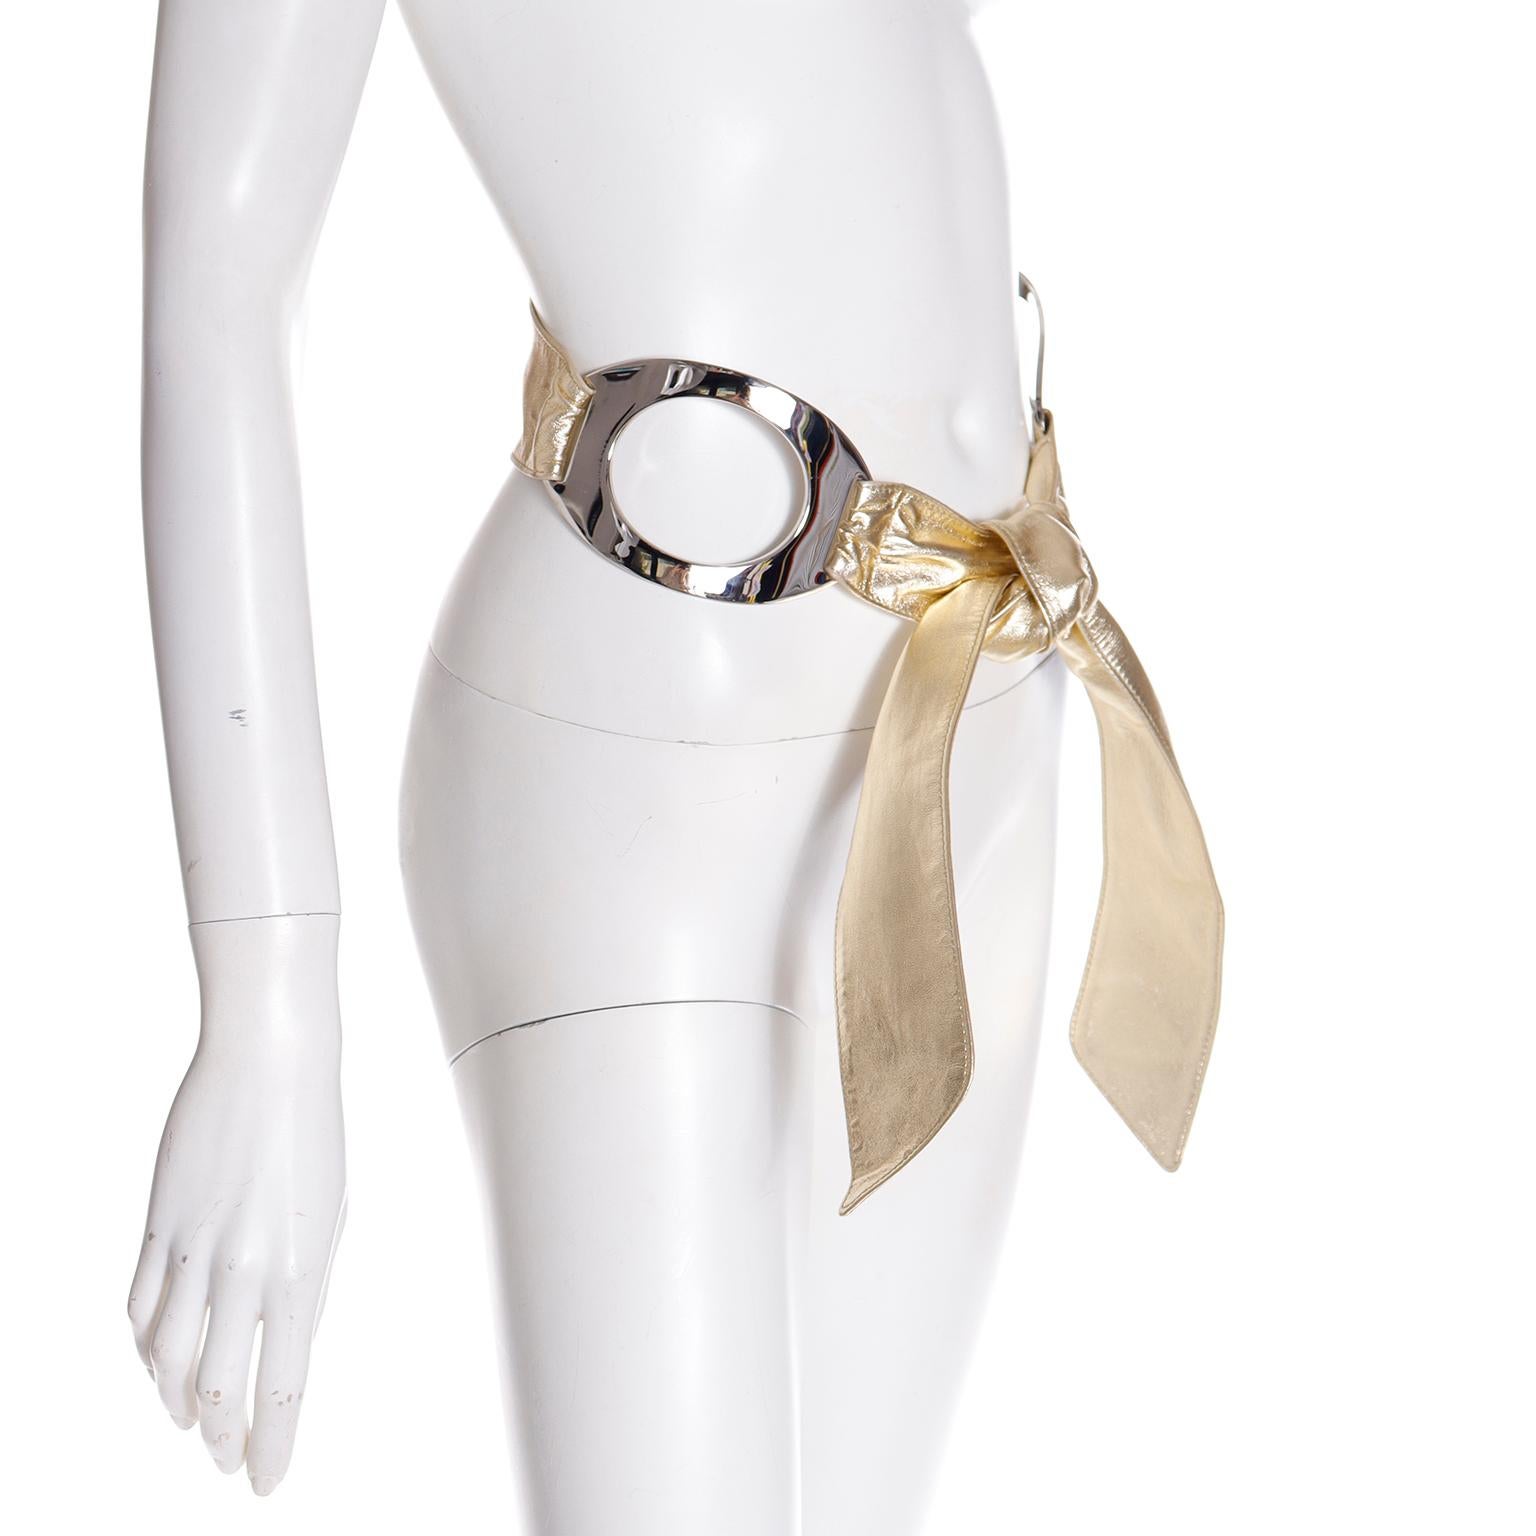 Valentino Vintage Fall 2002 Gold Runway Belt With Silver Double Buckles In Excellent Condition For Sale In Portland, OR